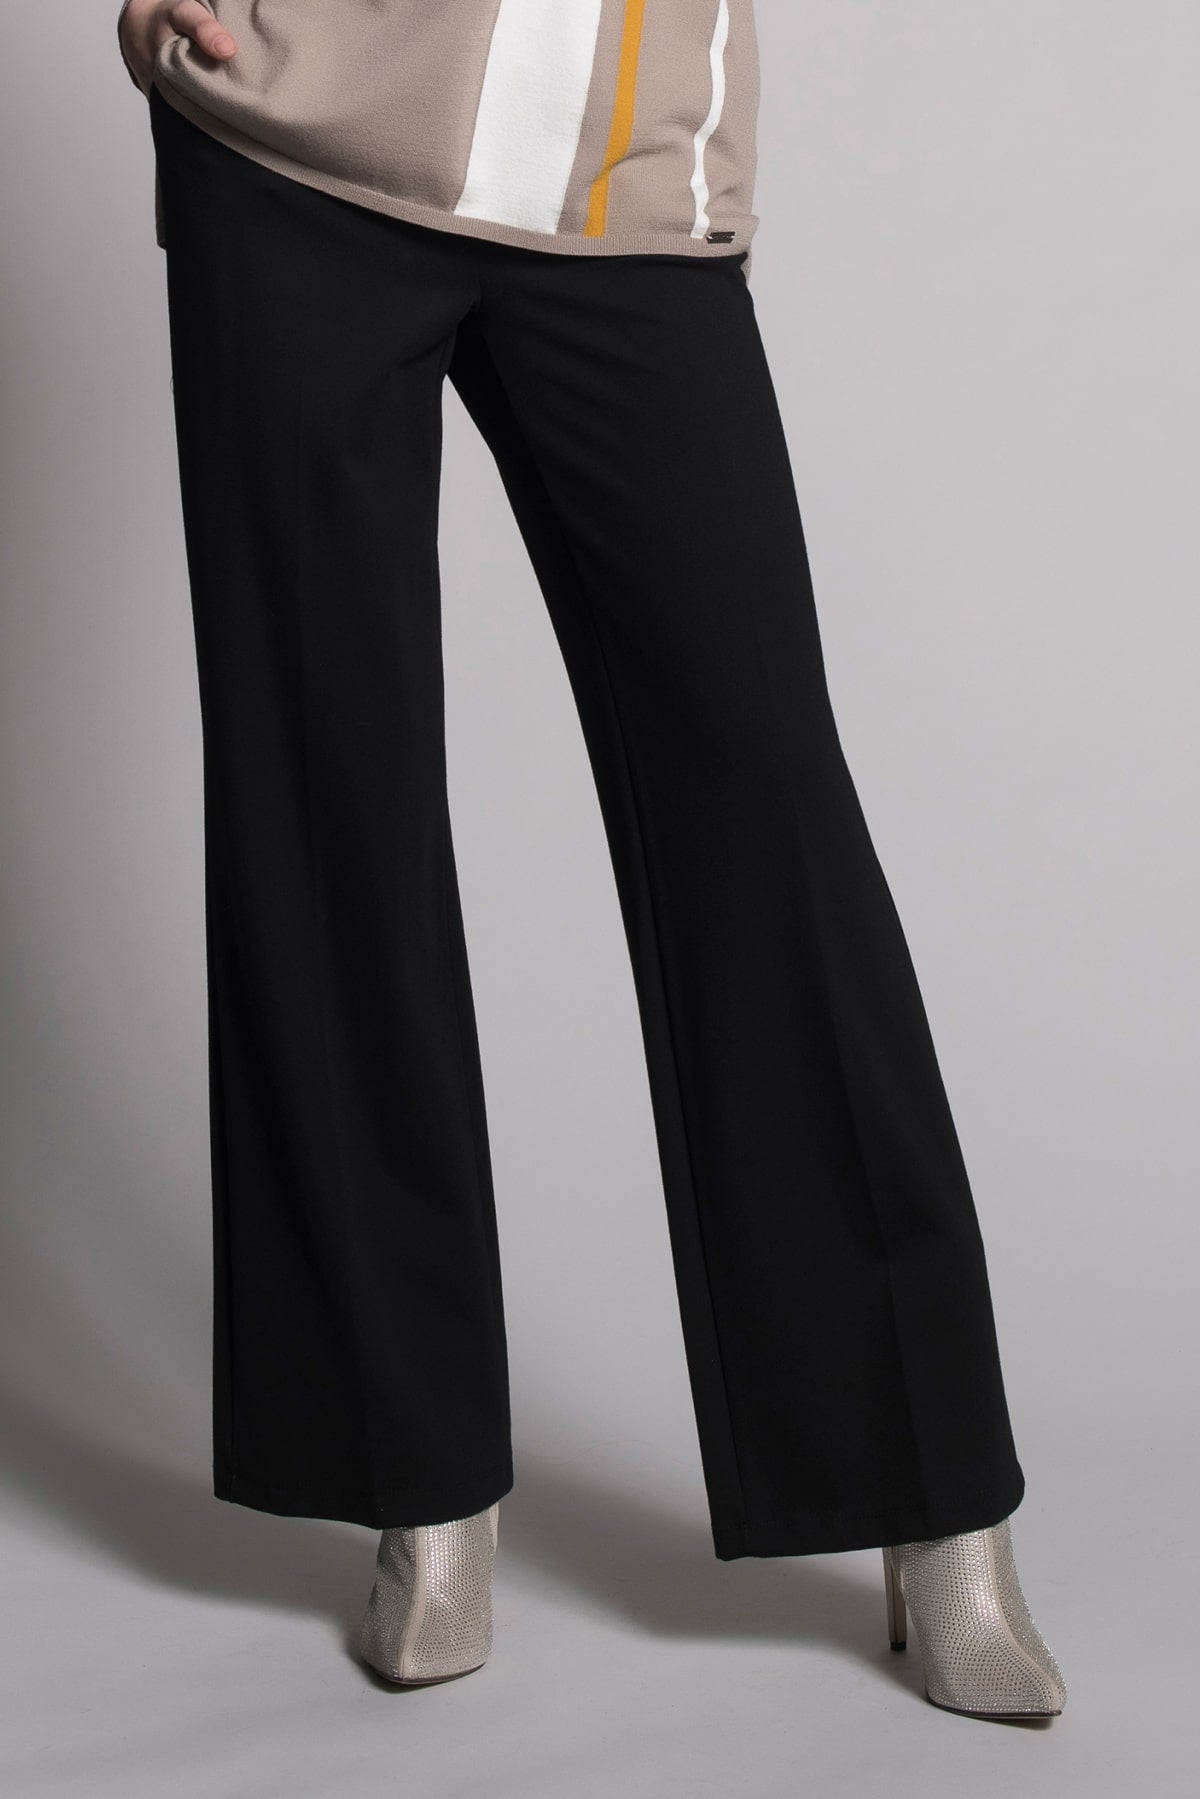 th products WIDE TAILORED PANTS BLACK